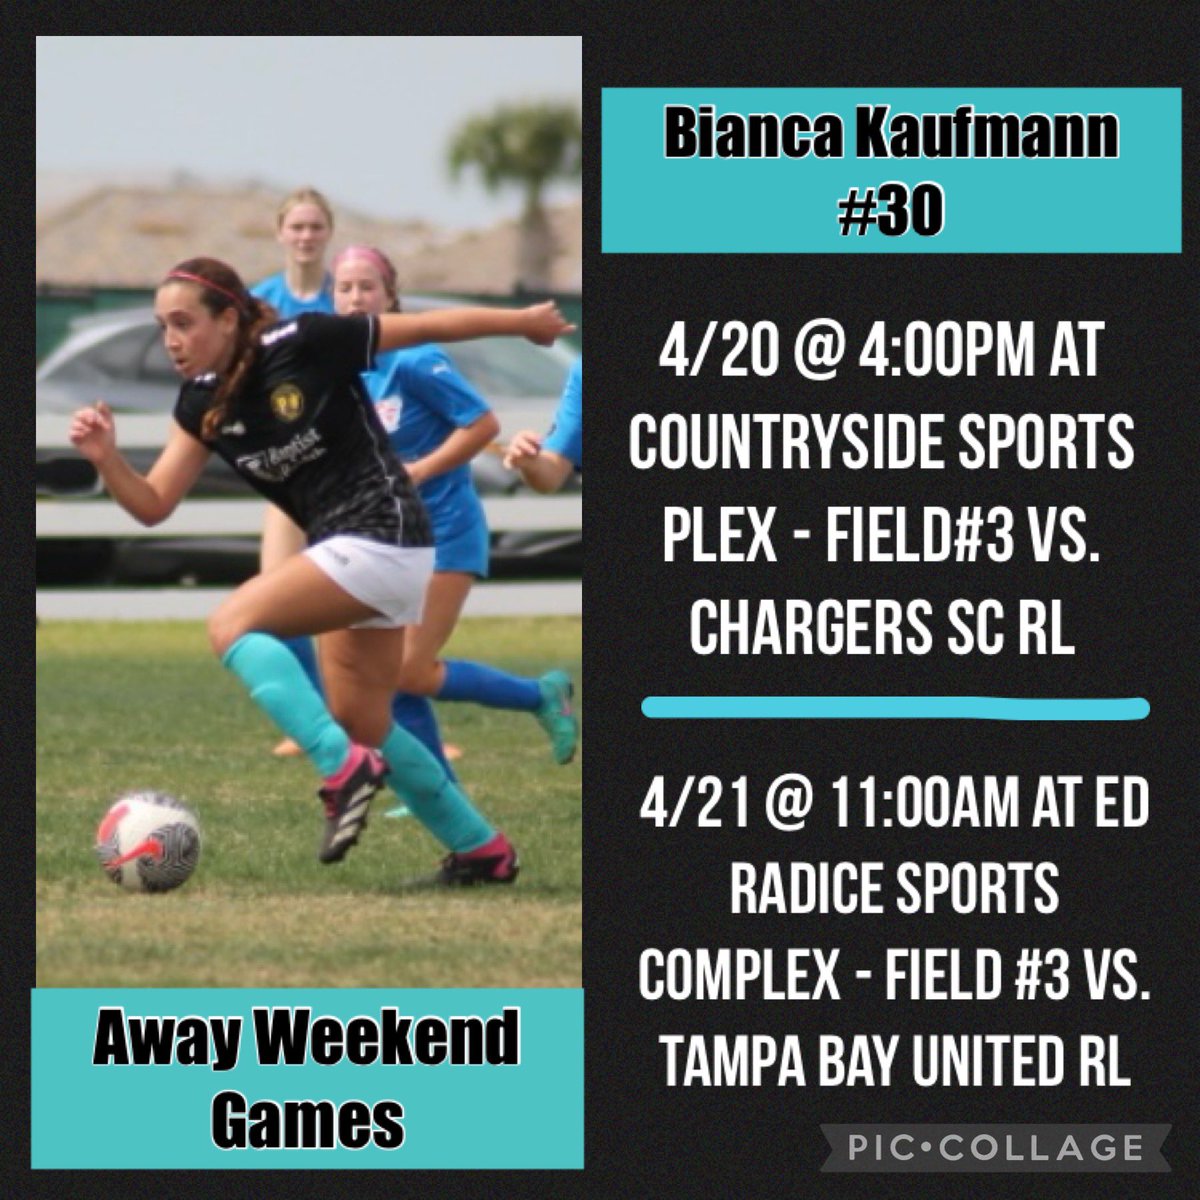 Two Away Games in Tampa this weekend!!
#classof2025 #midfield #collegerecruiting #ncsa